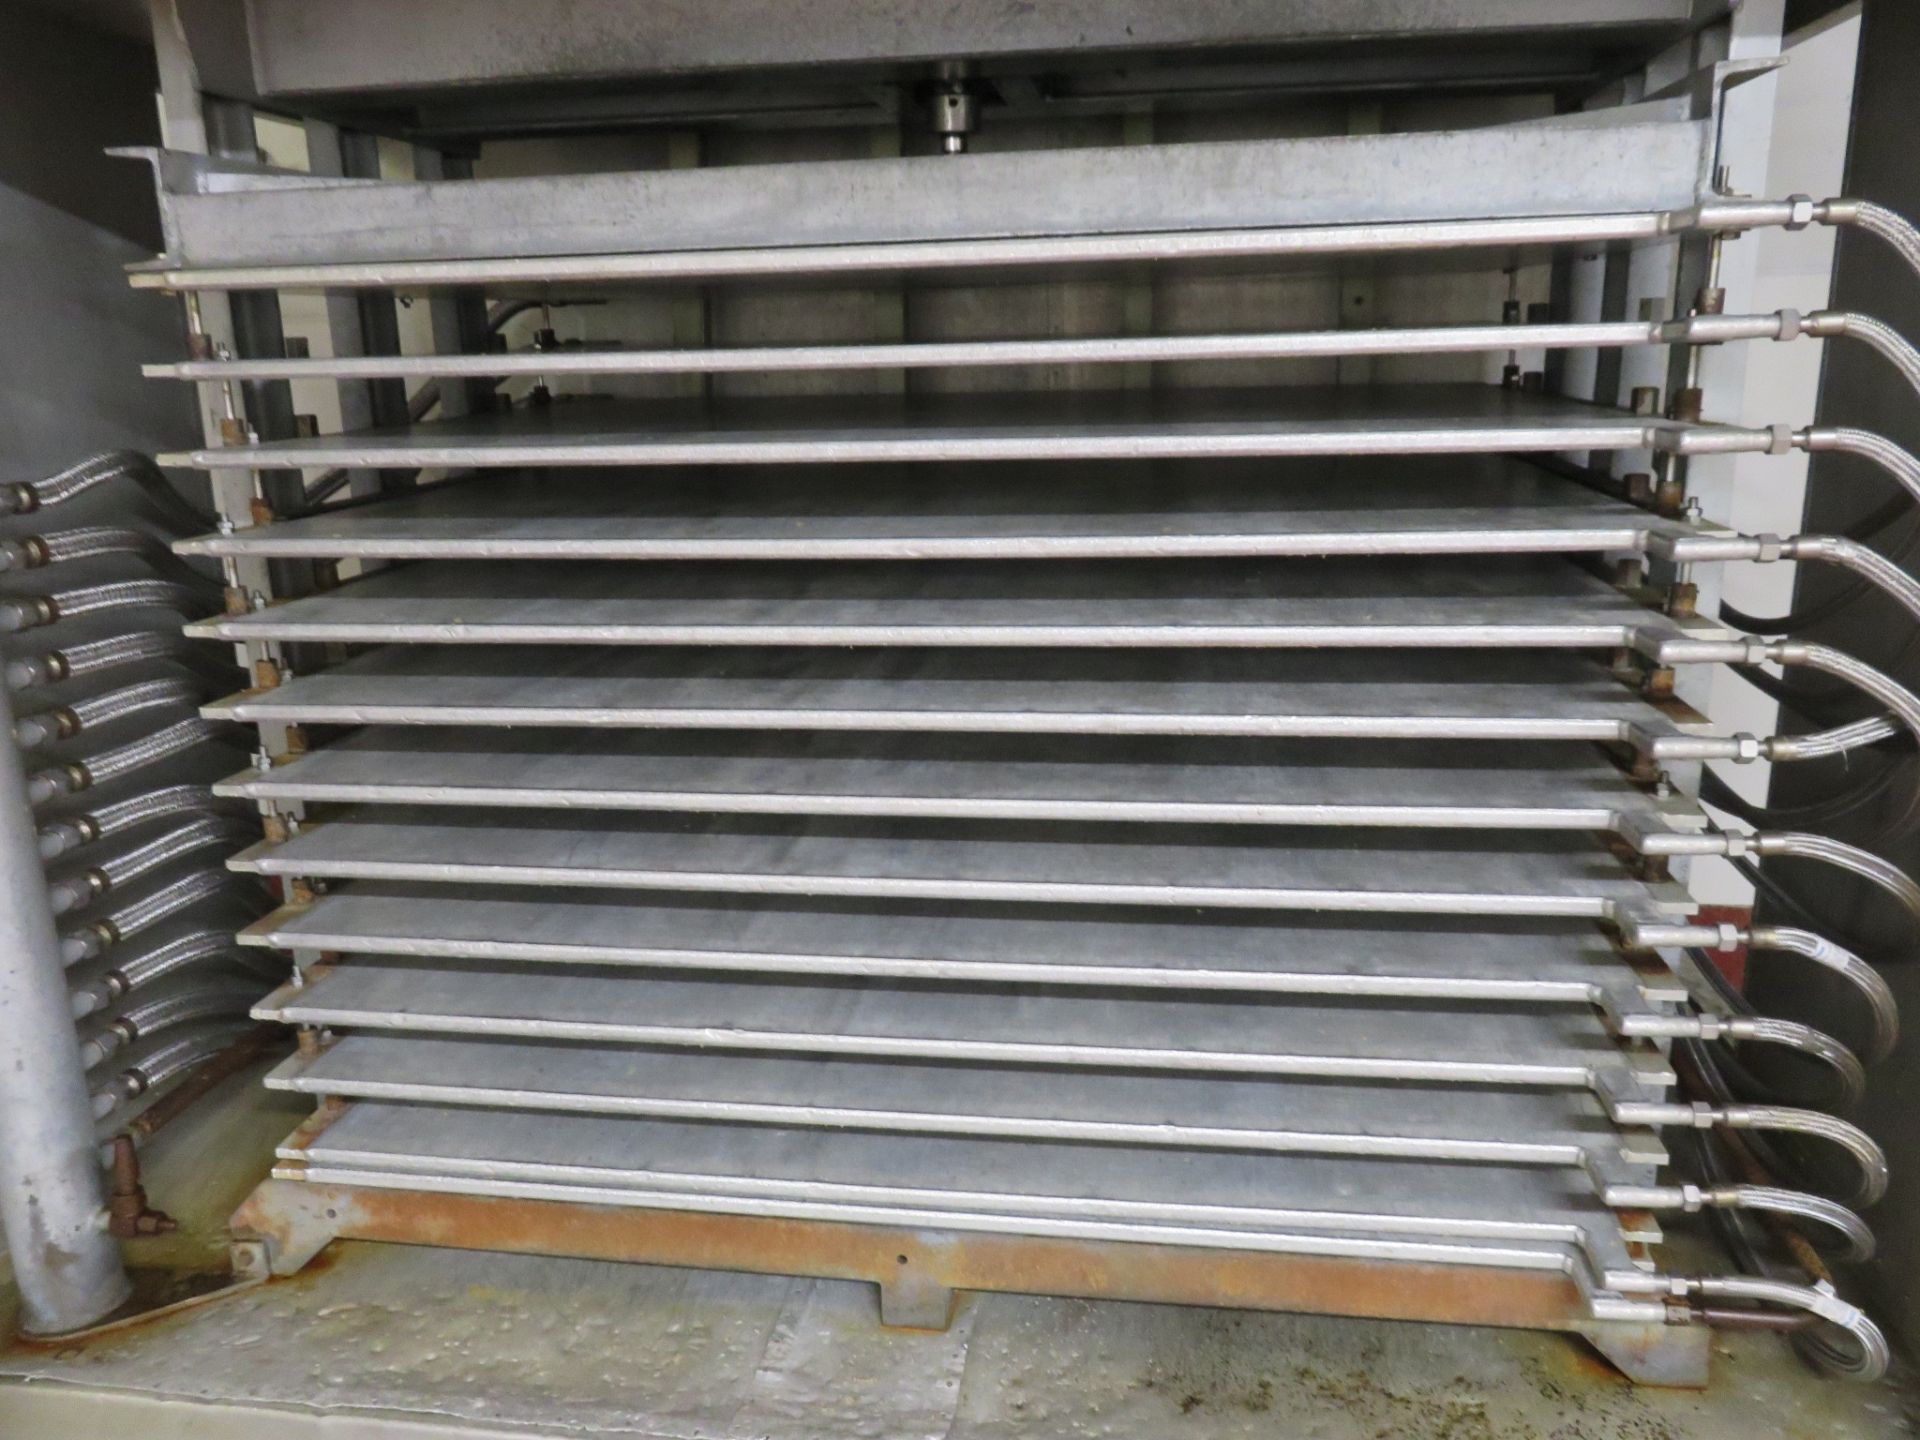 2 x APV Parafreeze Plate Freezers approx. 2.7 x 1.6 meters. 12 Station 1.1 x 1.6 meter Lift out £900 - Image 5 of 16